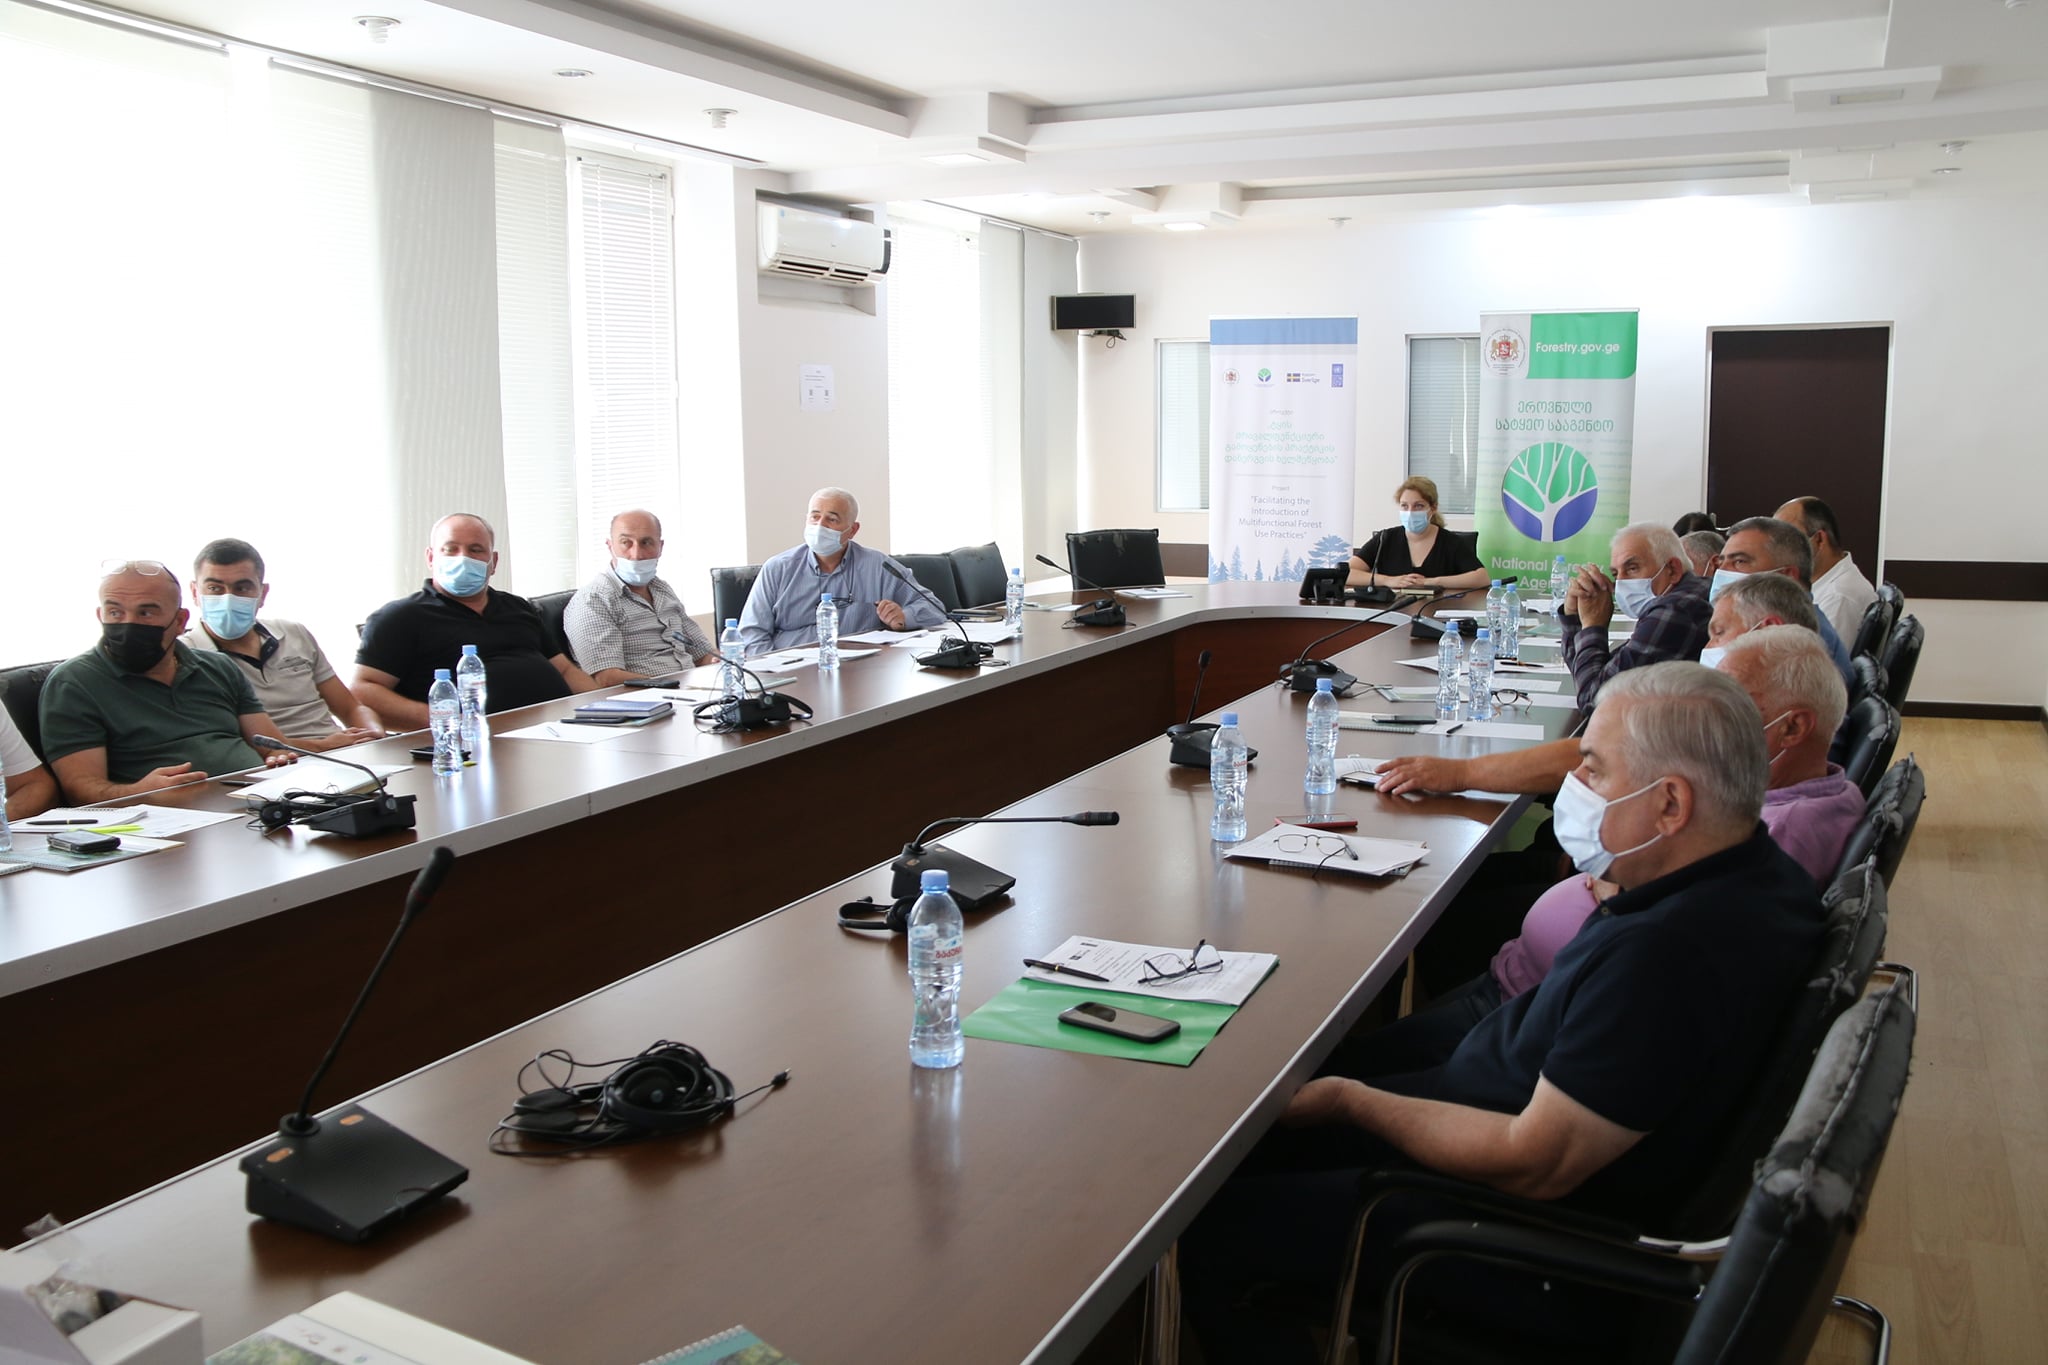 About 400 employees of the National Forest Agency underwent special training